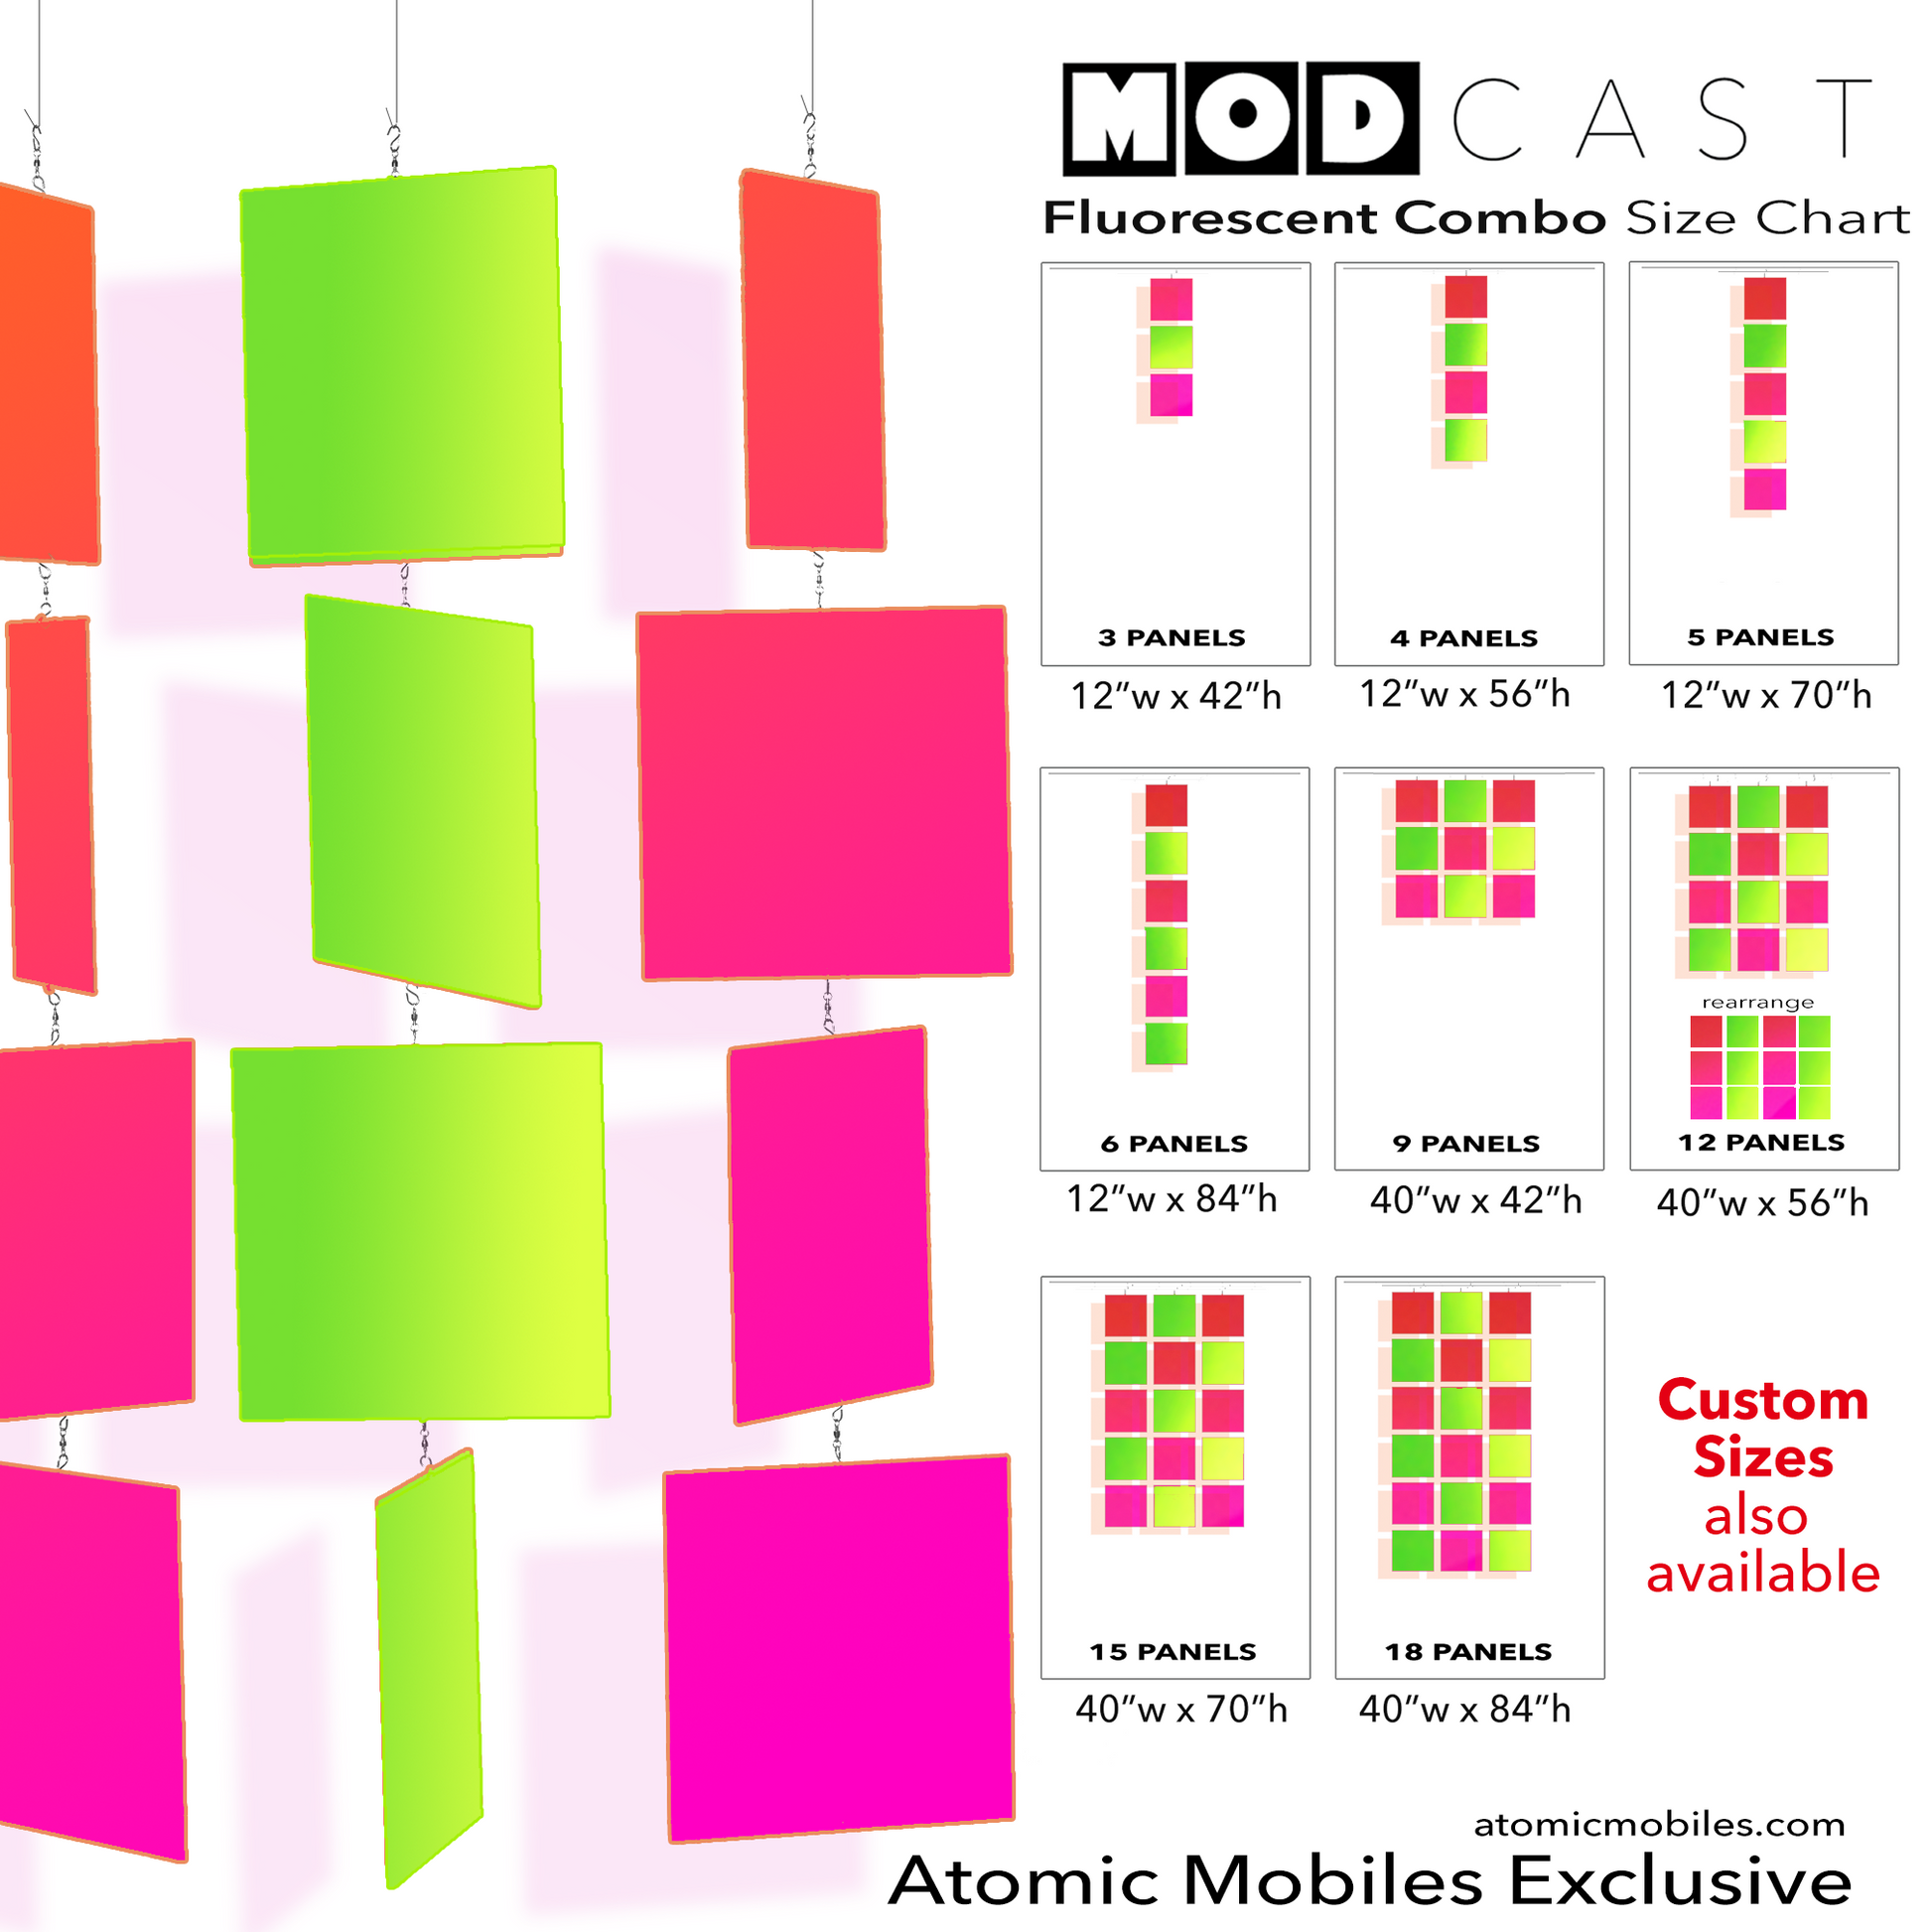 Fluorescent Combo in Hot Pink  and Lime Green MODcast mid century modern inspired hanging art mobiles by AtomicMobiles.com